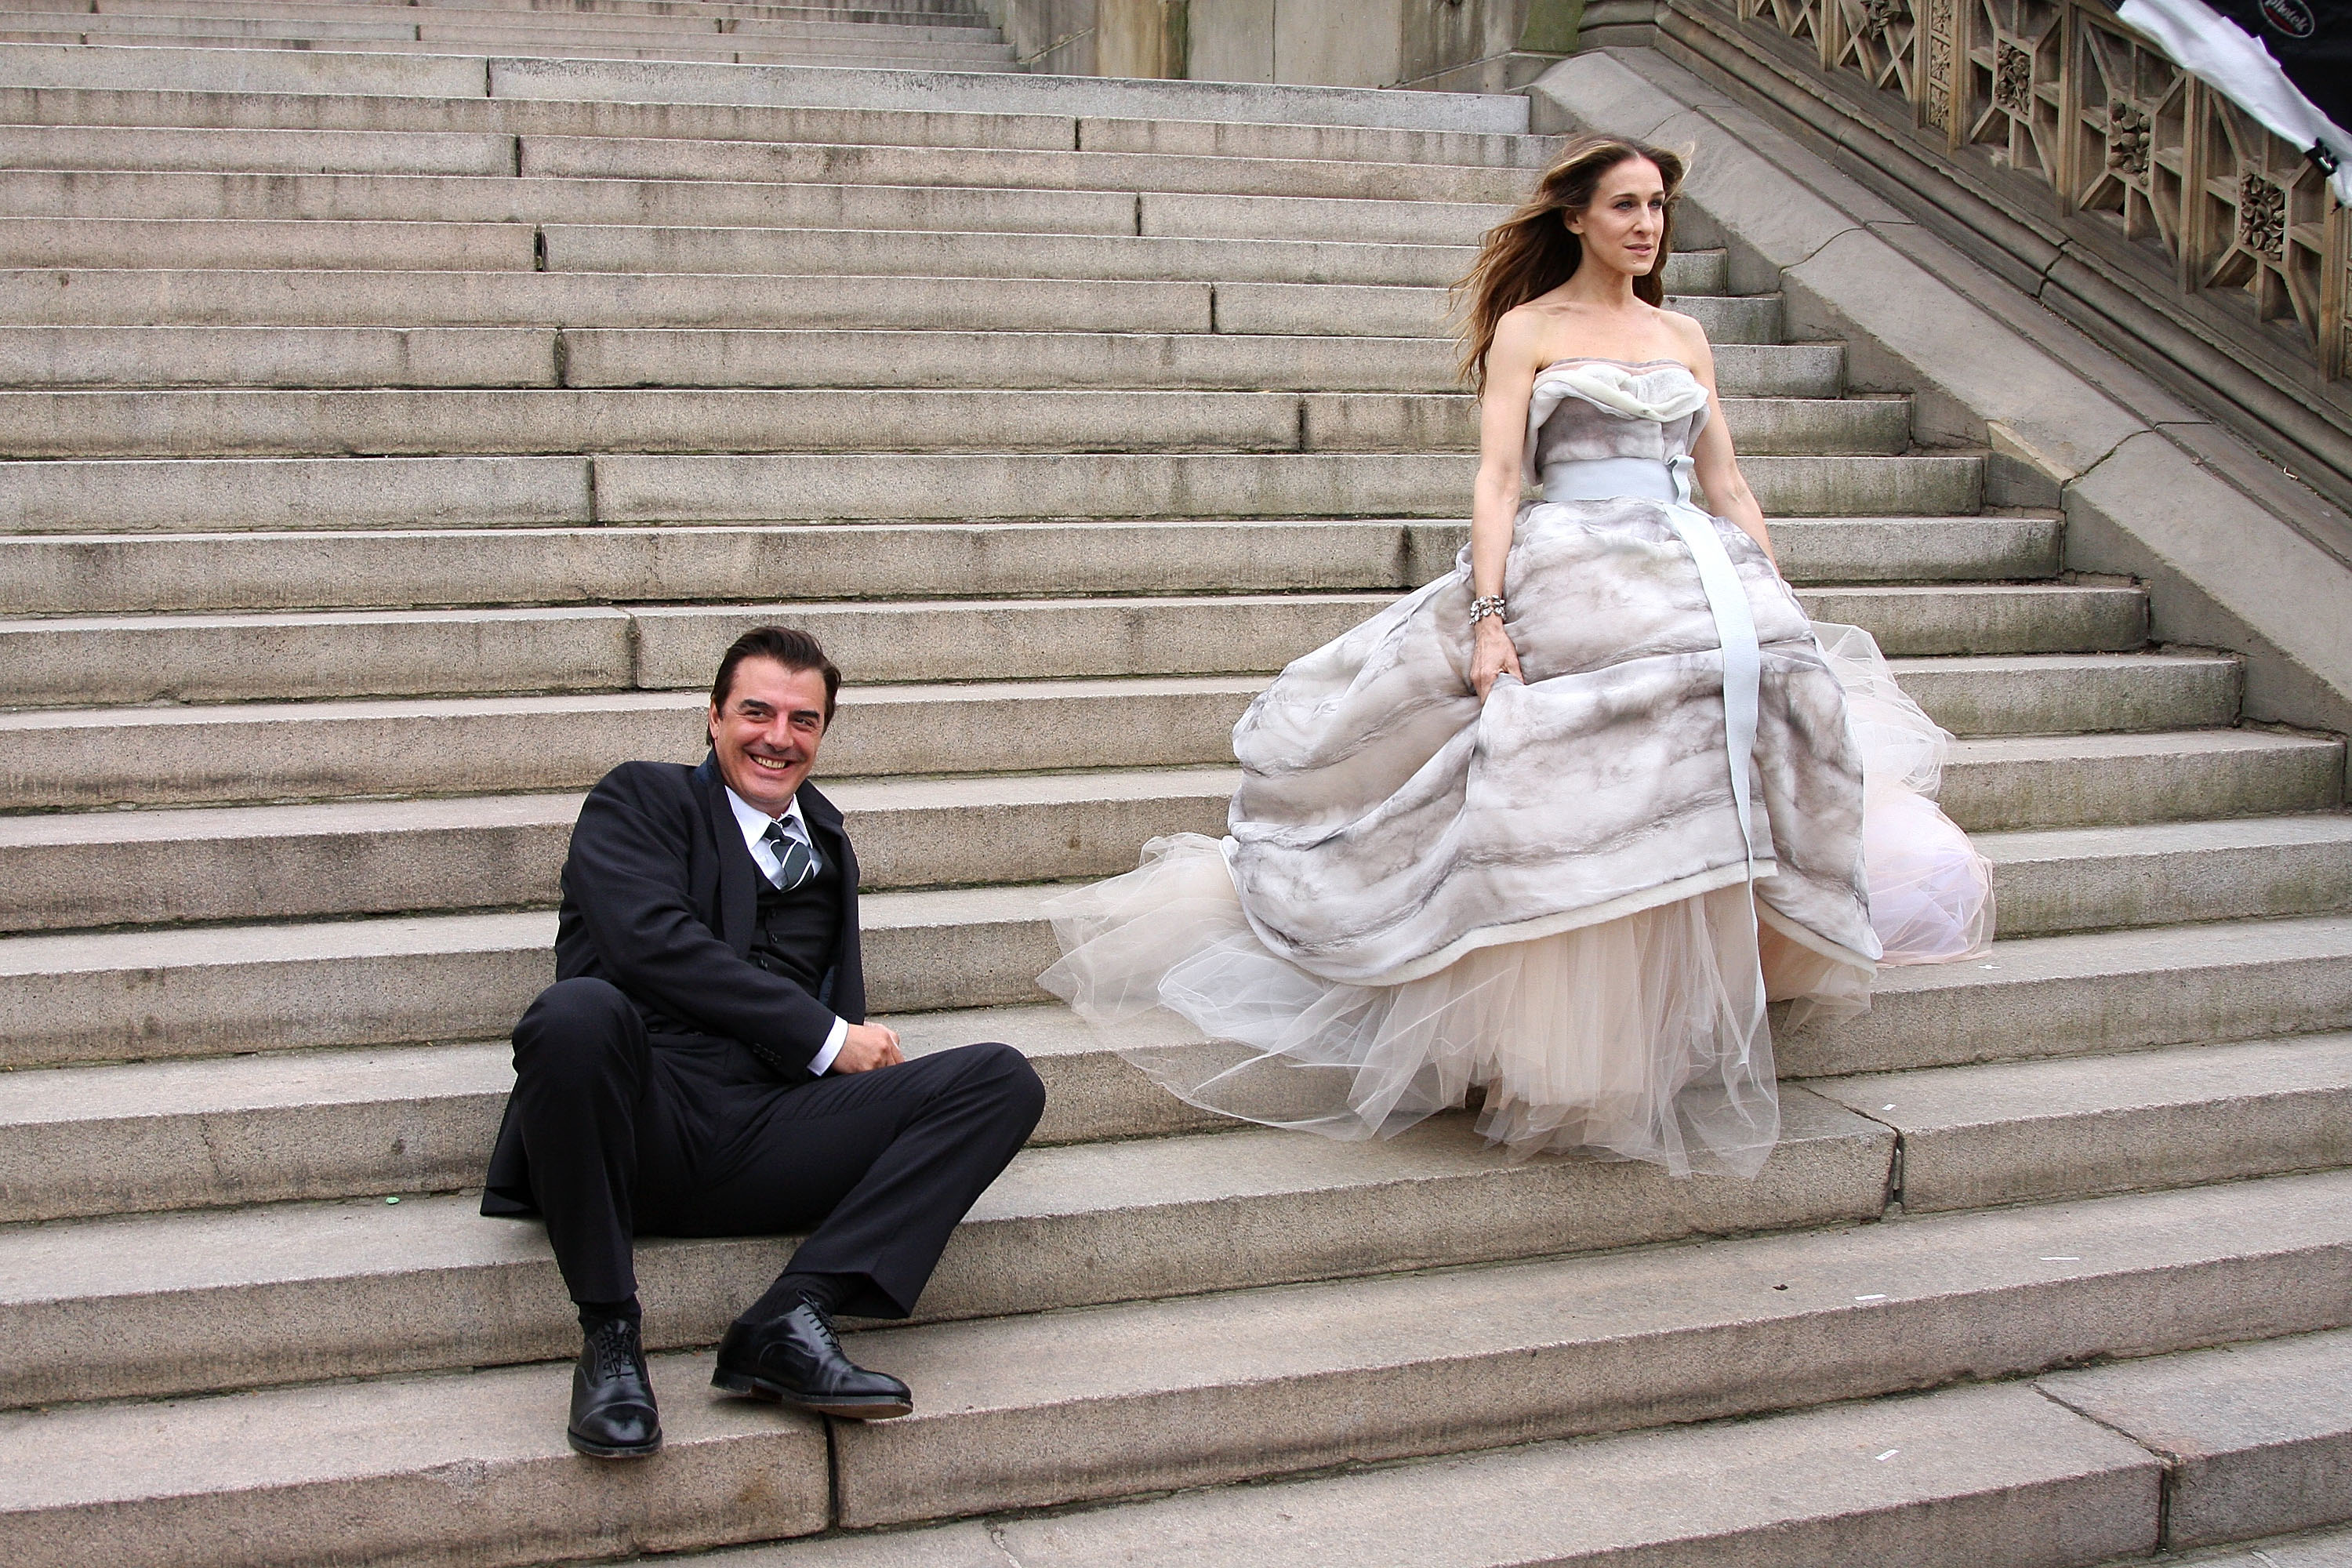 Chris Noth and Sarah Jessica Parker on location for a 'Vogue' photoshoot